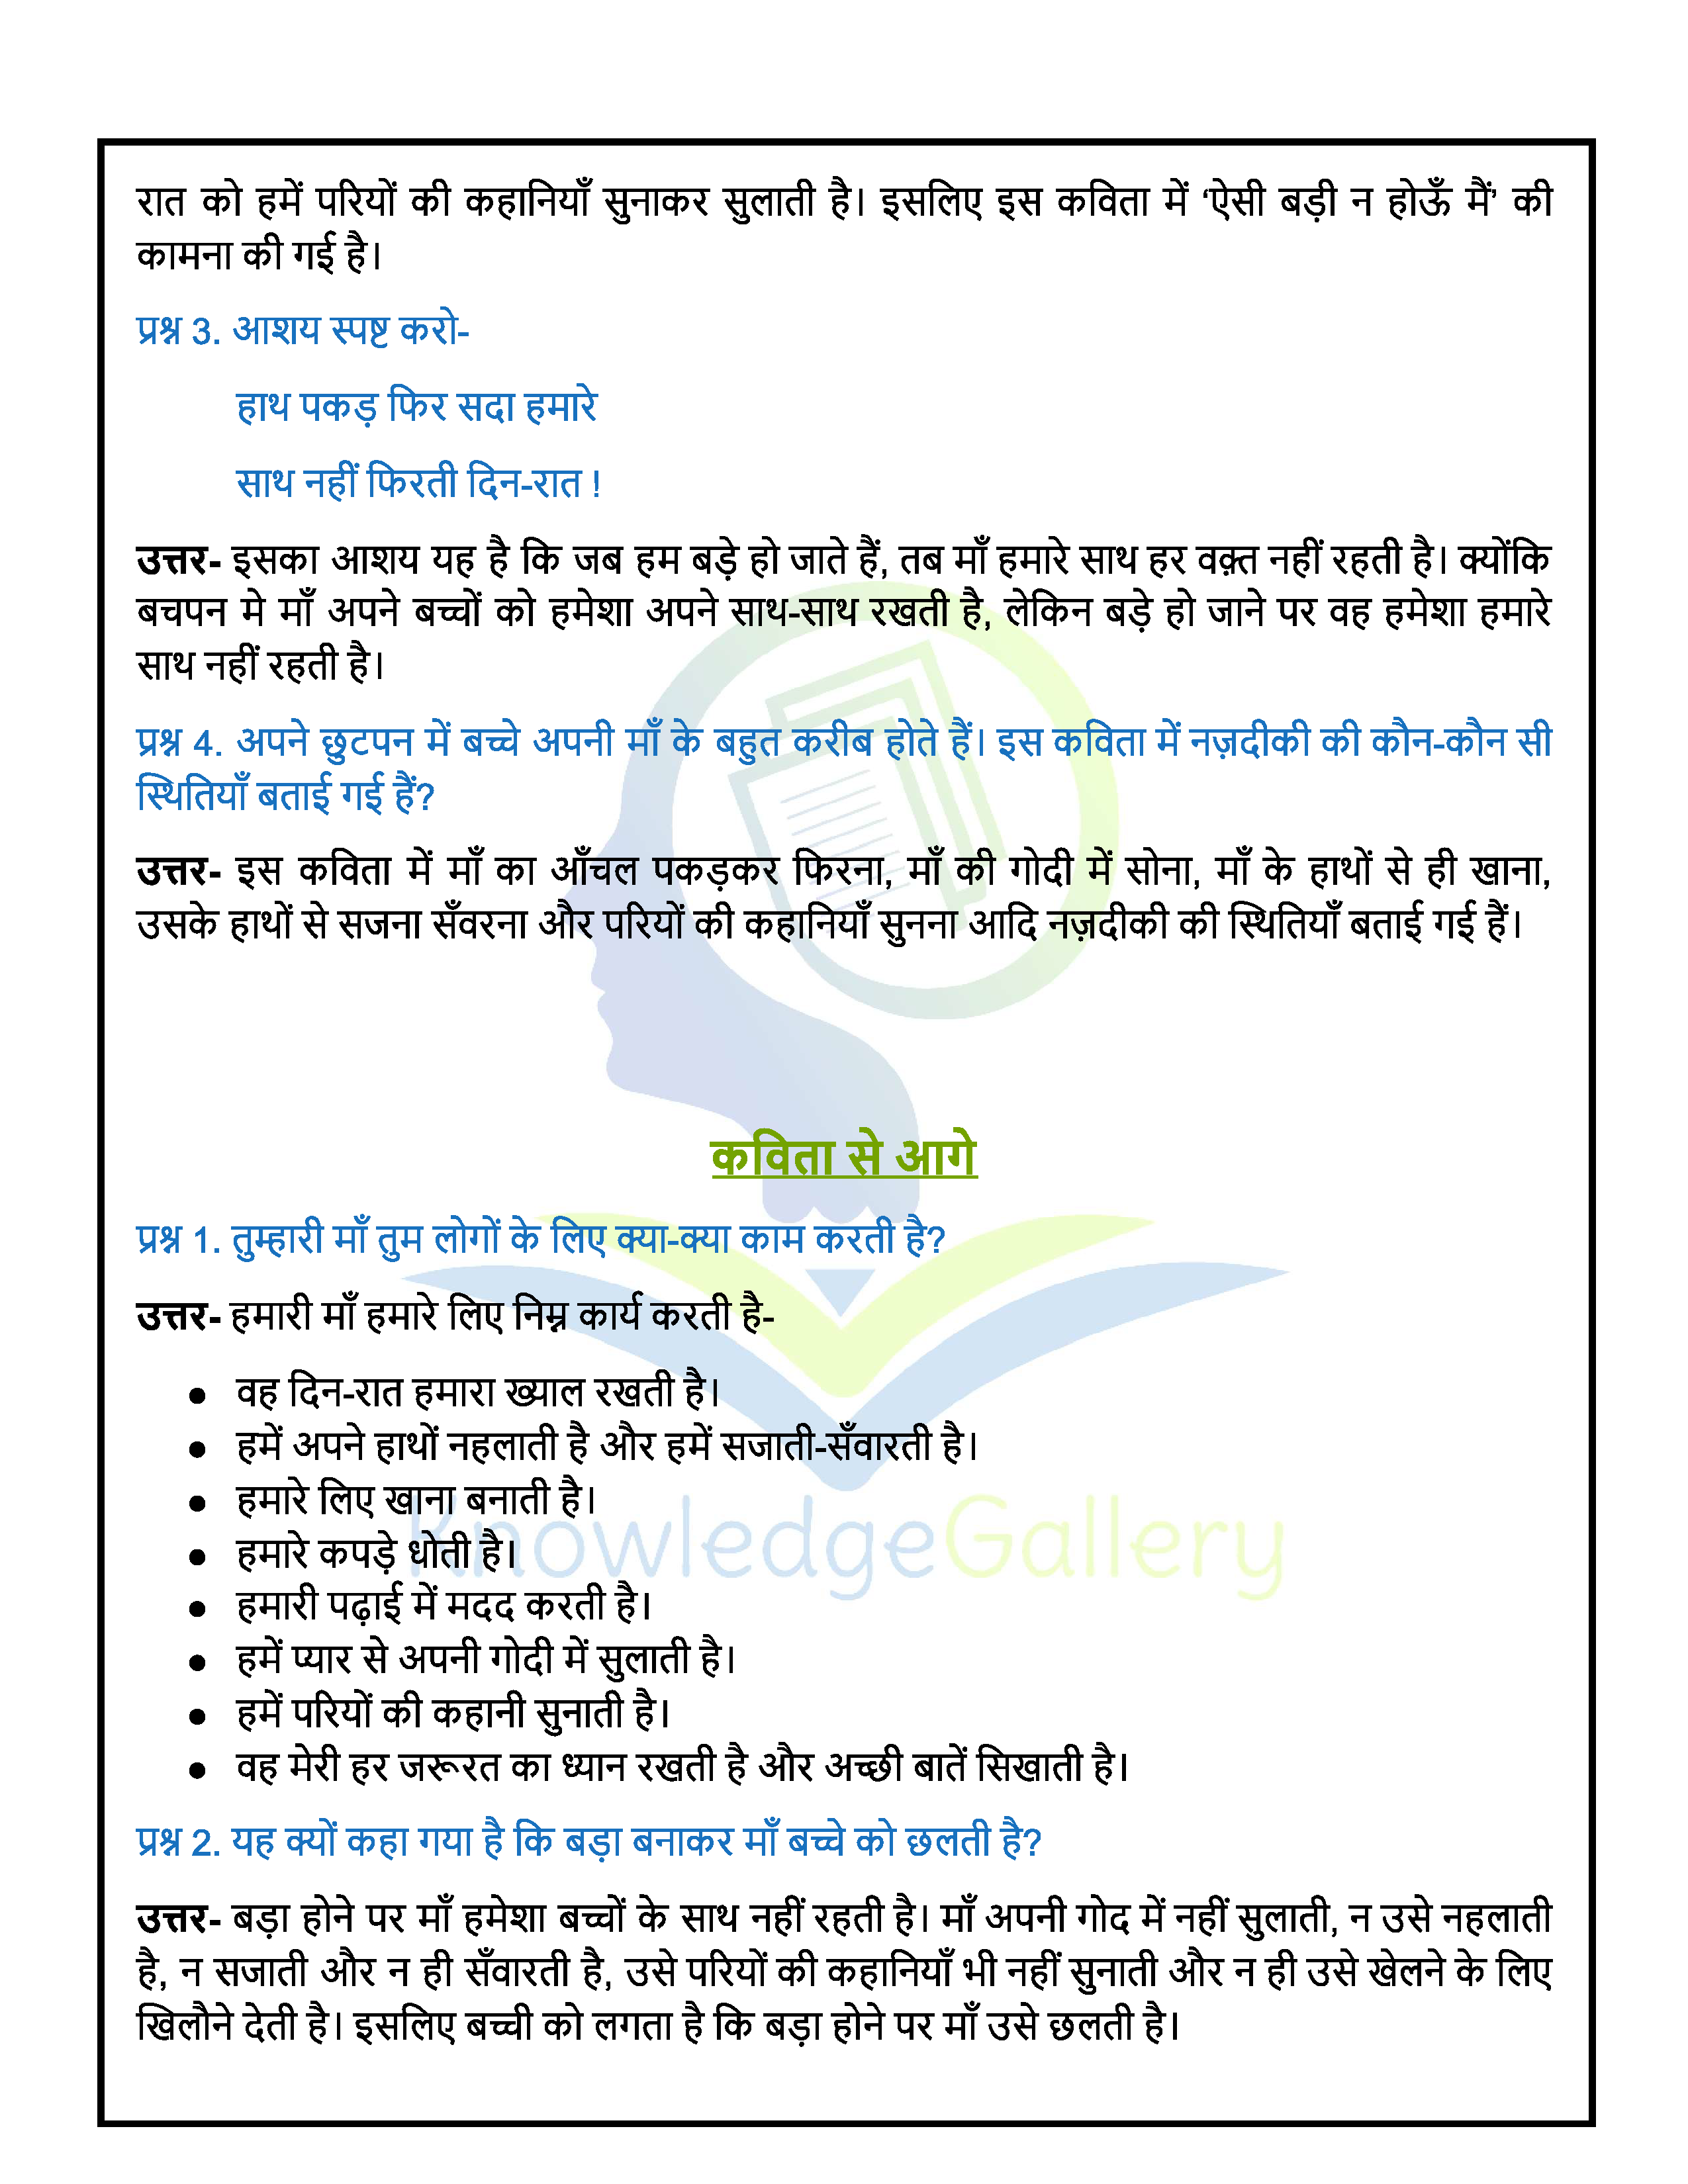 NCERT Solution For Class 6 Hindi Chapter 13 part 3